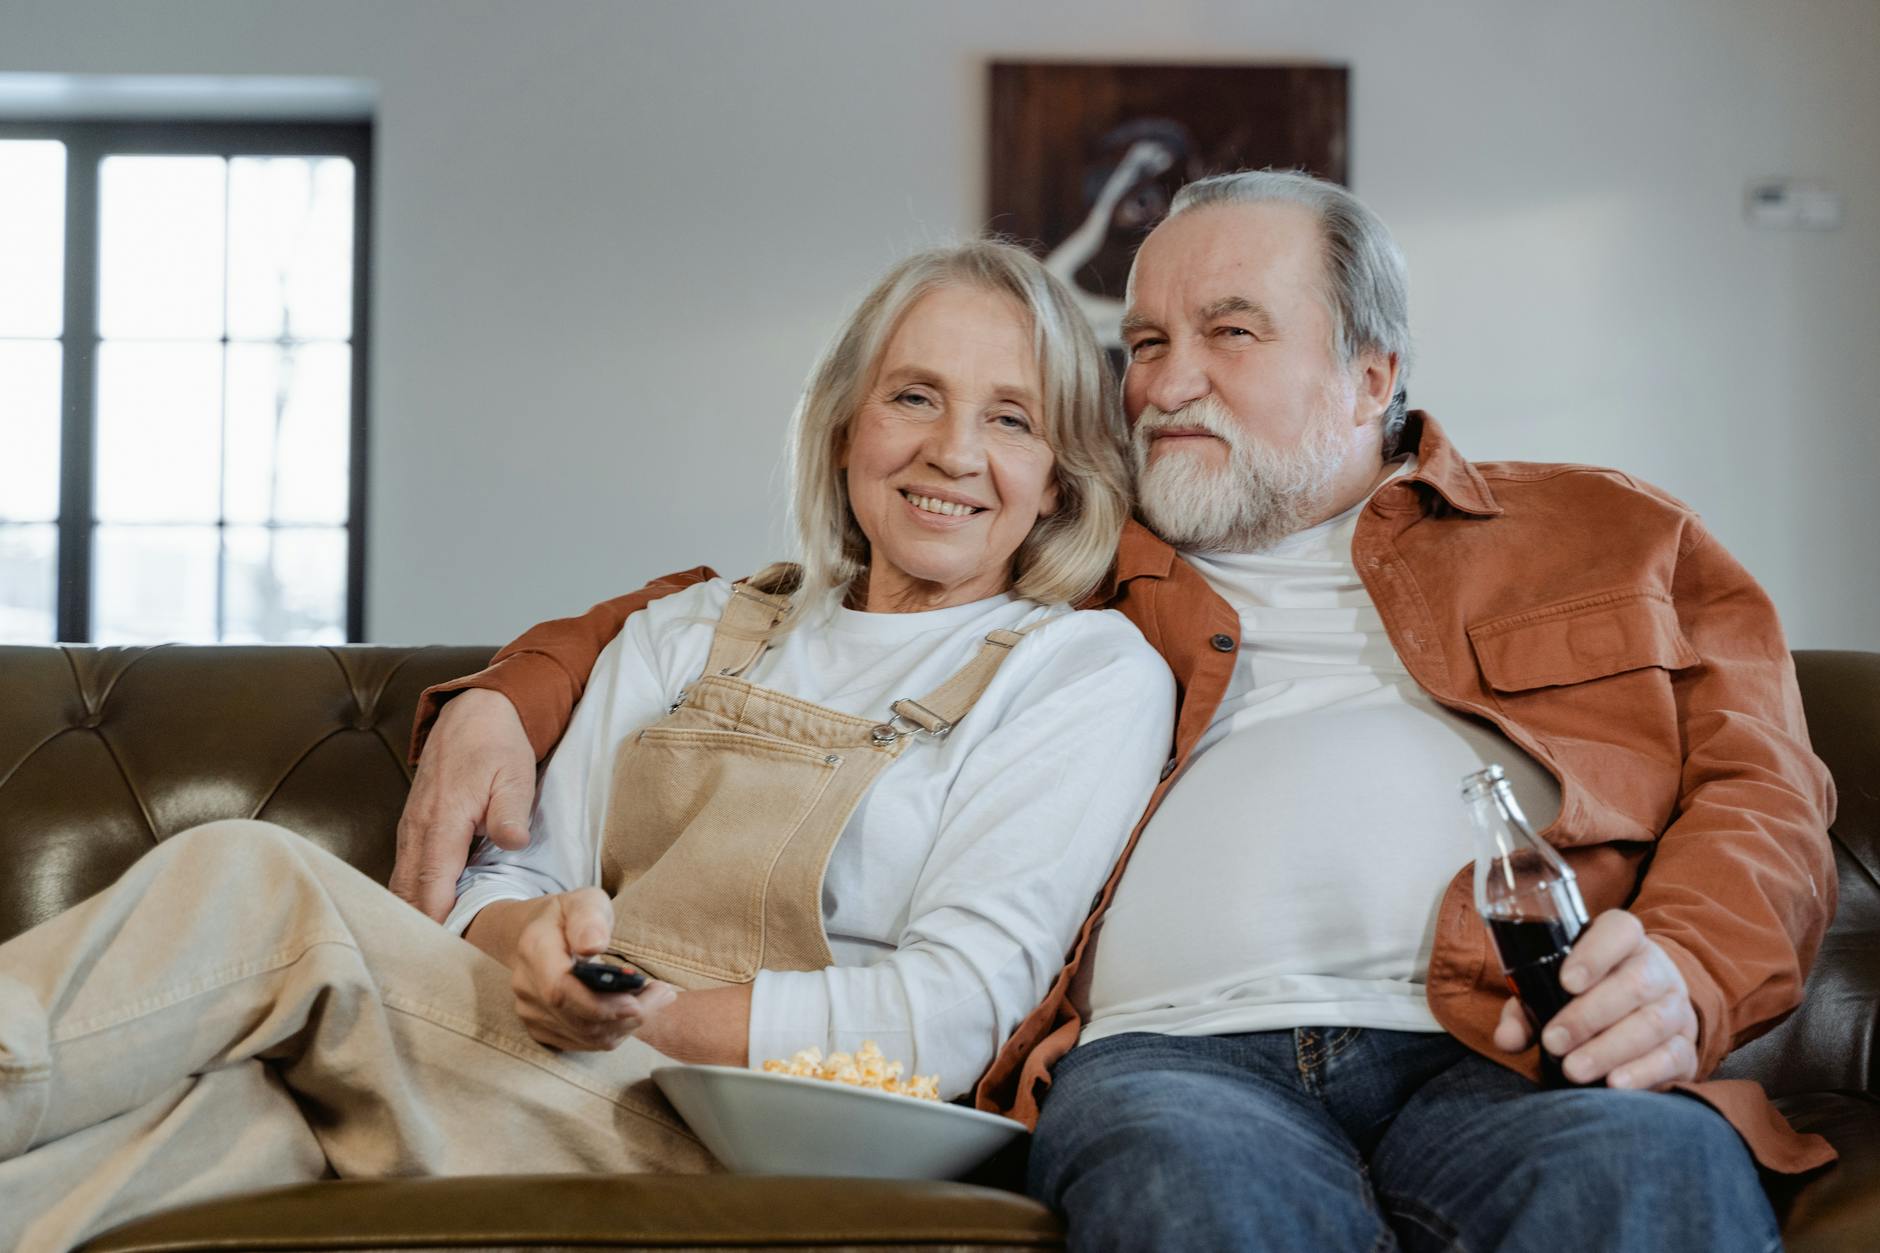 Older couple snuggled on the couch with snacks. The woman is holding the remote and the man holds a drink.